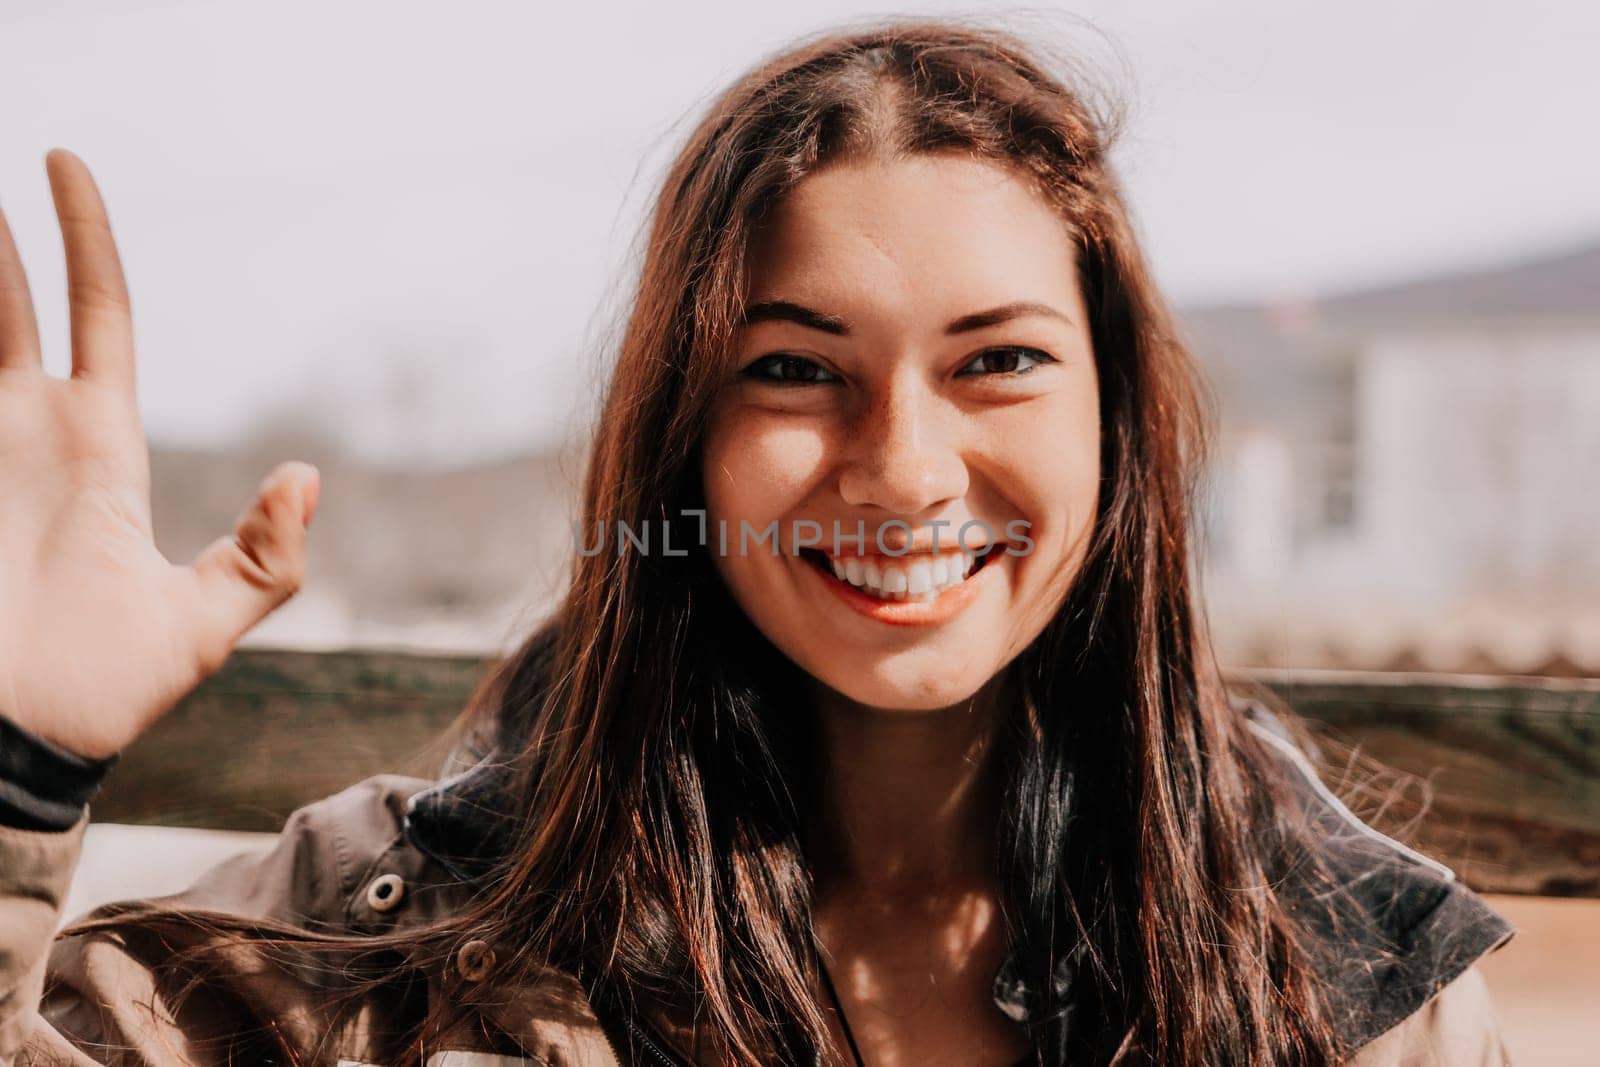 Happy young smiling woman with freckles outdoors portrait. Soft sunny colors. Outdoor close-up portrait of a young brunette woman and looking to the camera, posing against nature background.